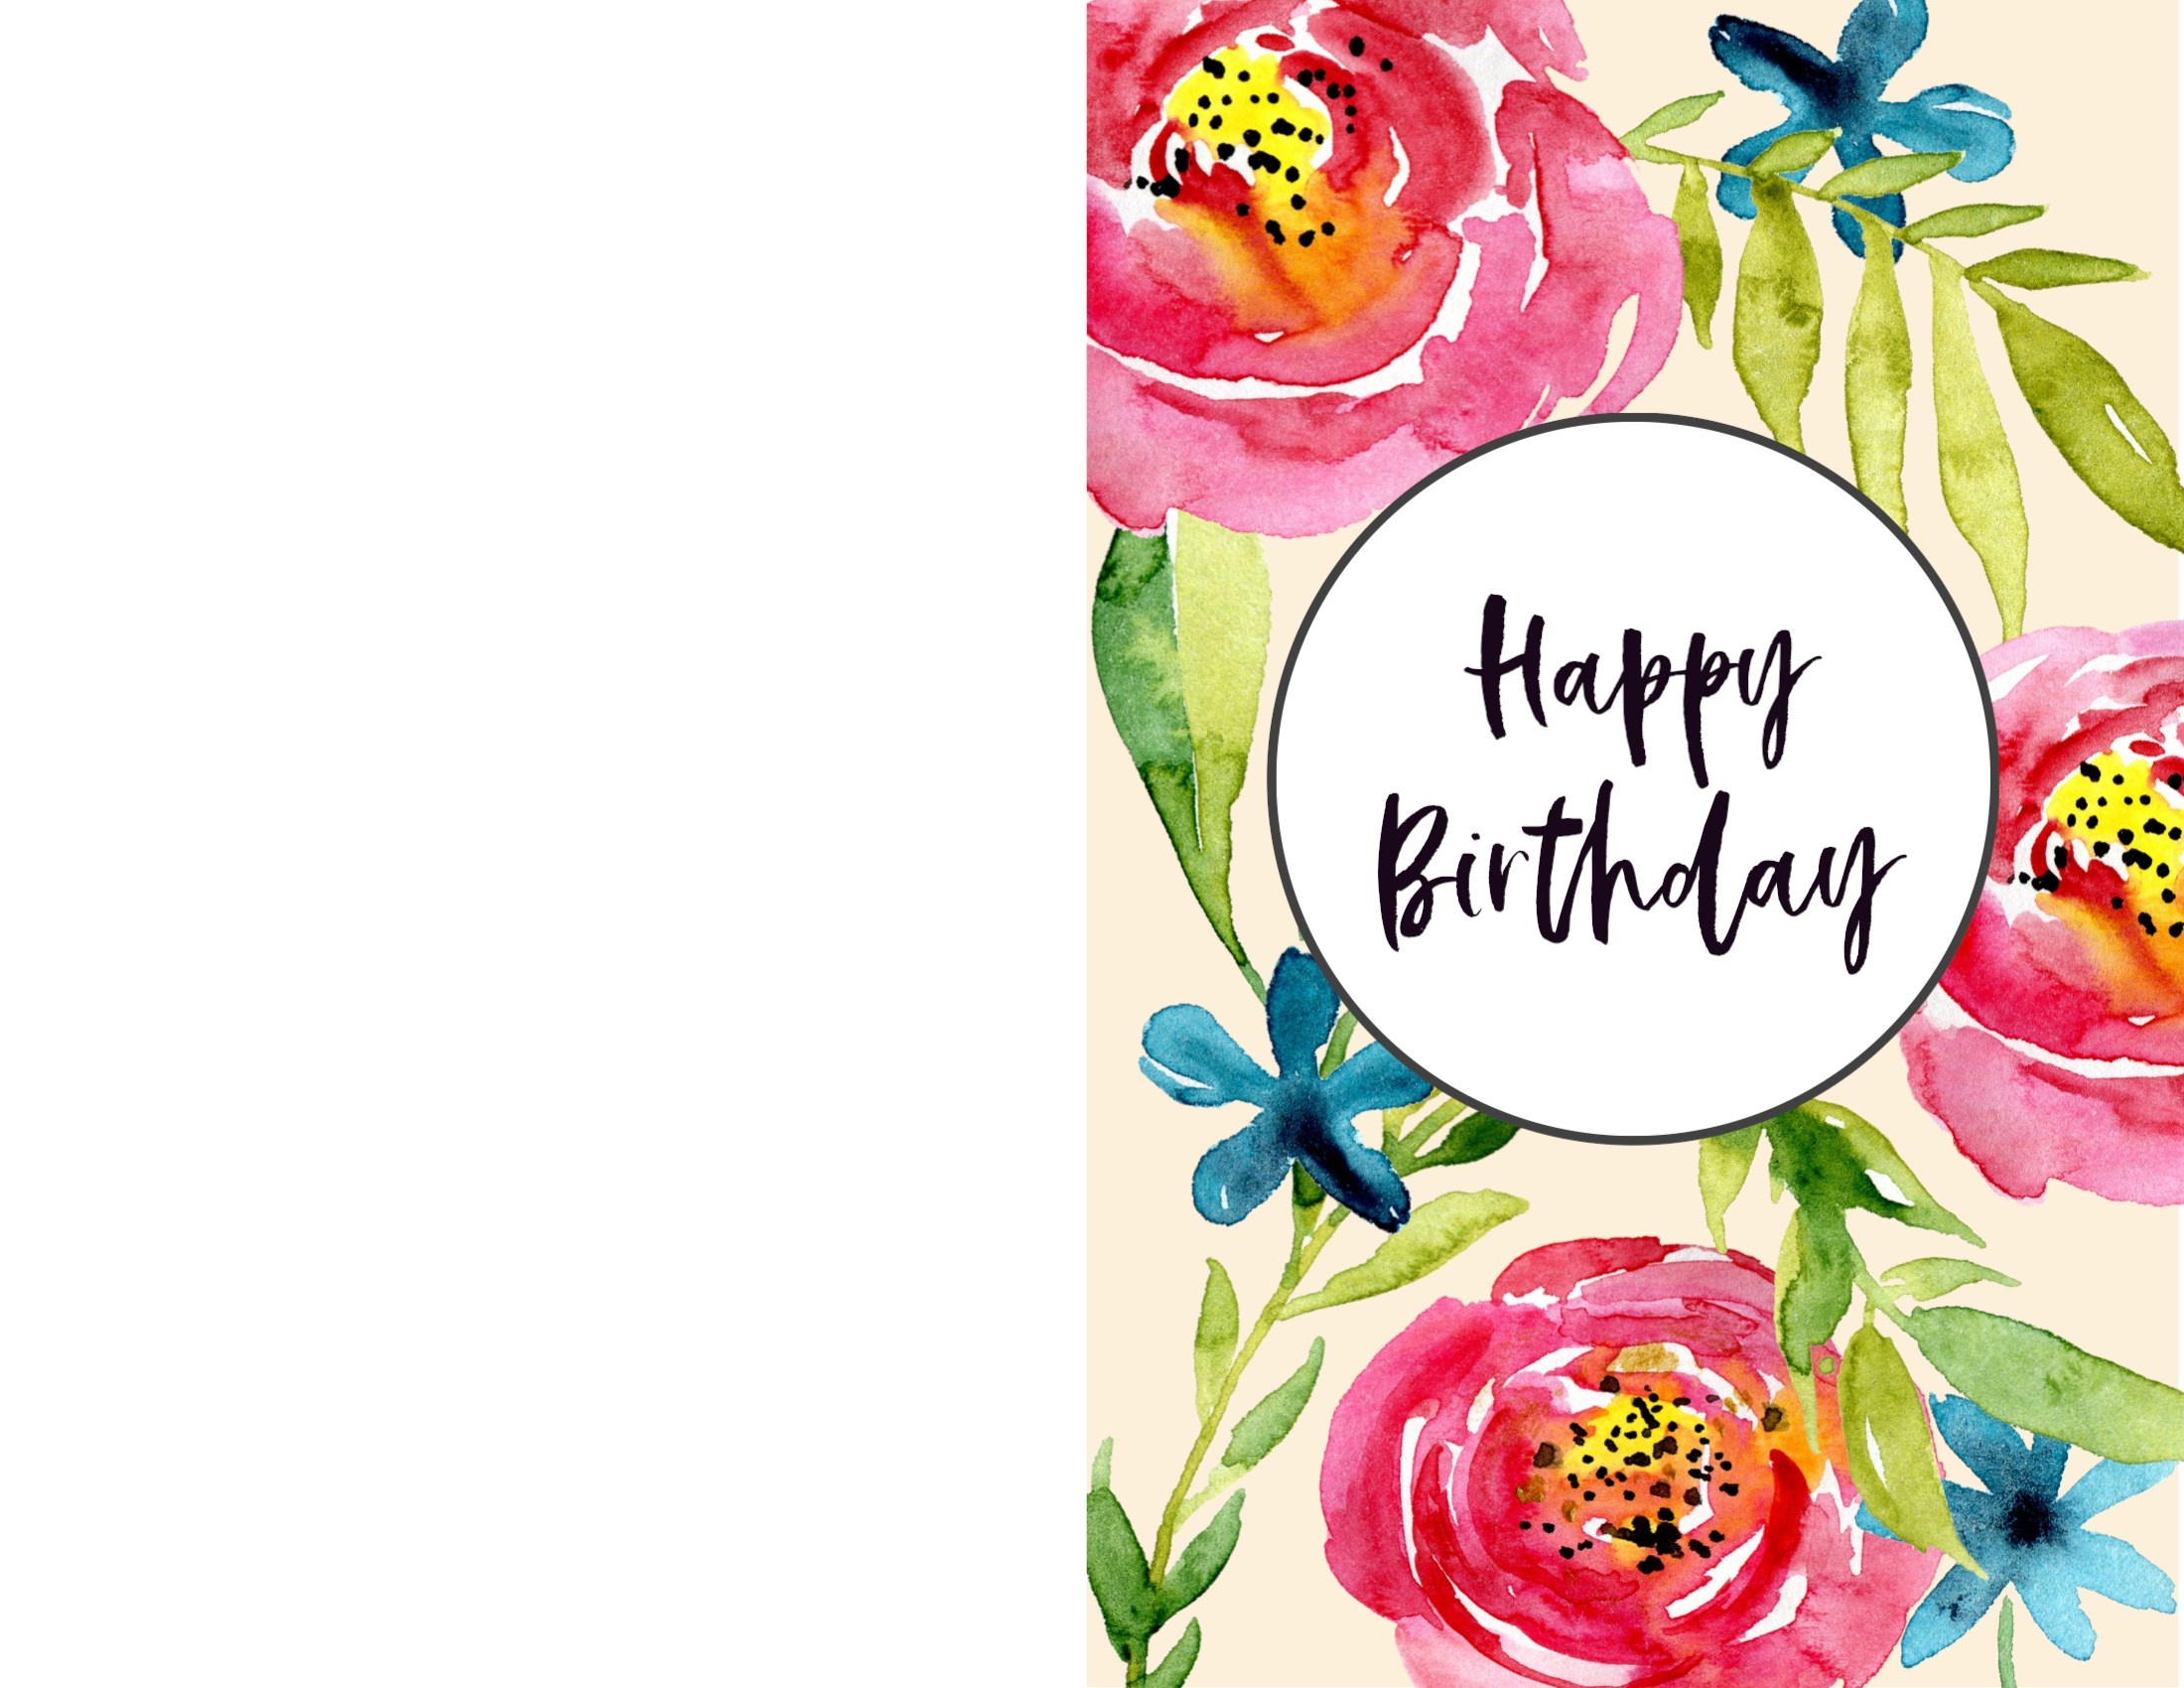 Free Printable Birthday Cards - Paper Trail Design - Free Printable Greeting Cards No Sign Up